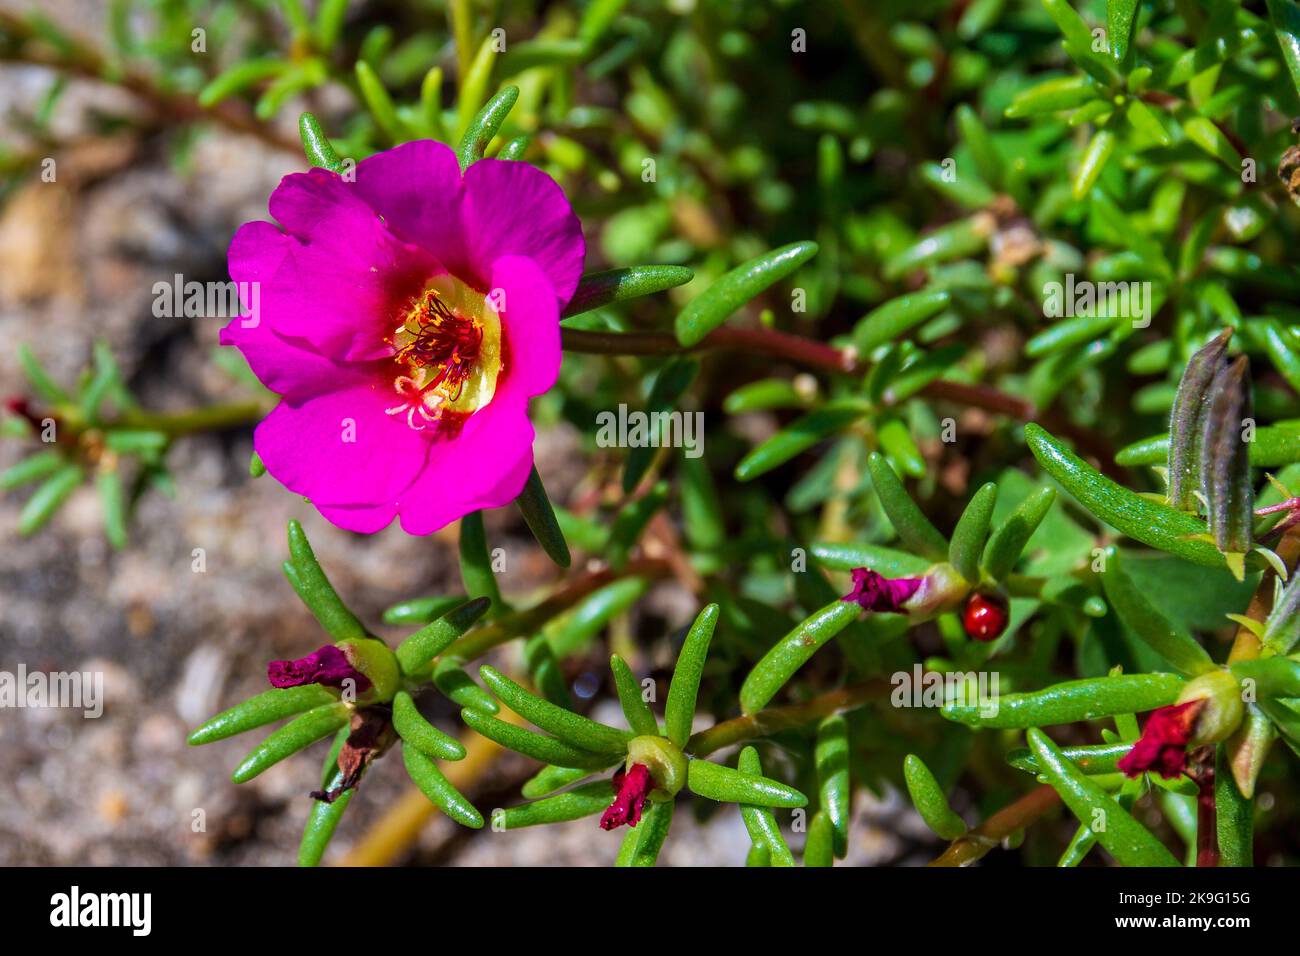 Herb Portulaca oleracea - Common Purslane, Little Hogweed or Pursley. Pink flower with green leaves Stock Photo